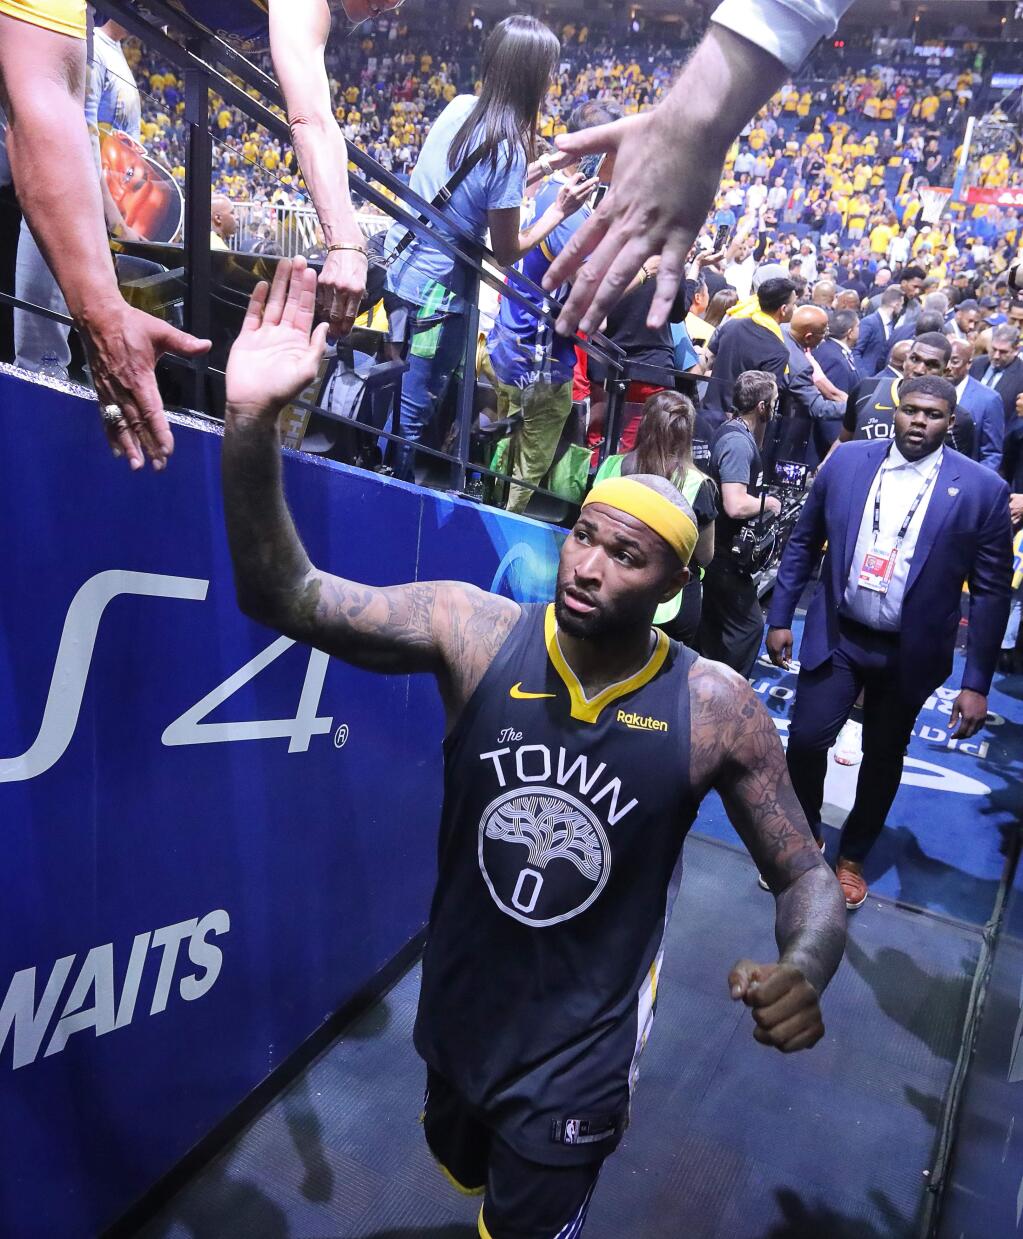 Golden State Warriors center DeMarcus Cousins leaves the court after his team lost to the Toronto Raptors during game 6 of the NBA Finals in Oakland on Thursday, June 13, 2019. (Christopher Chung/ The Press Democrat)